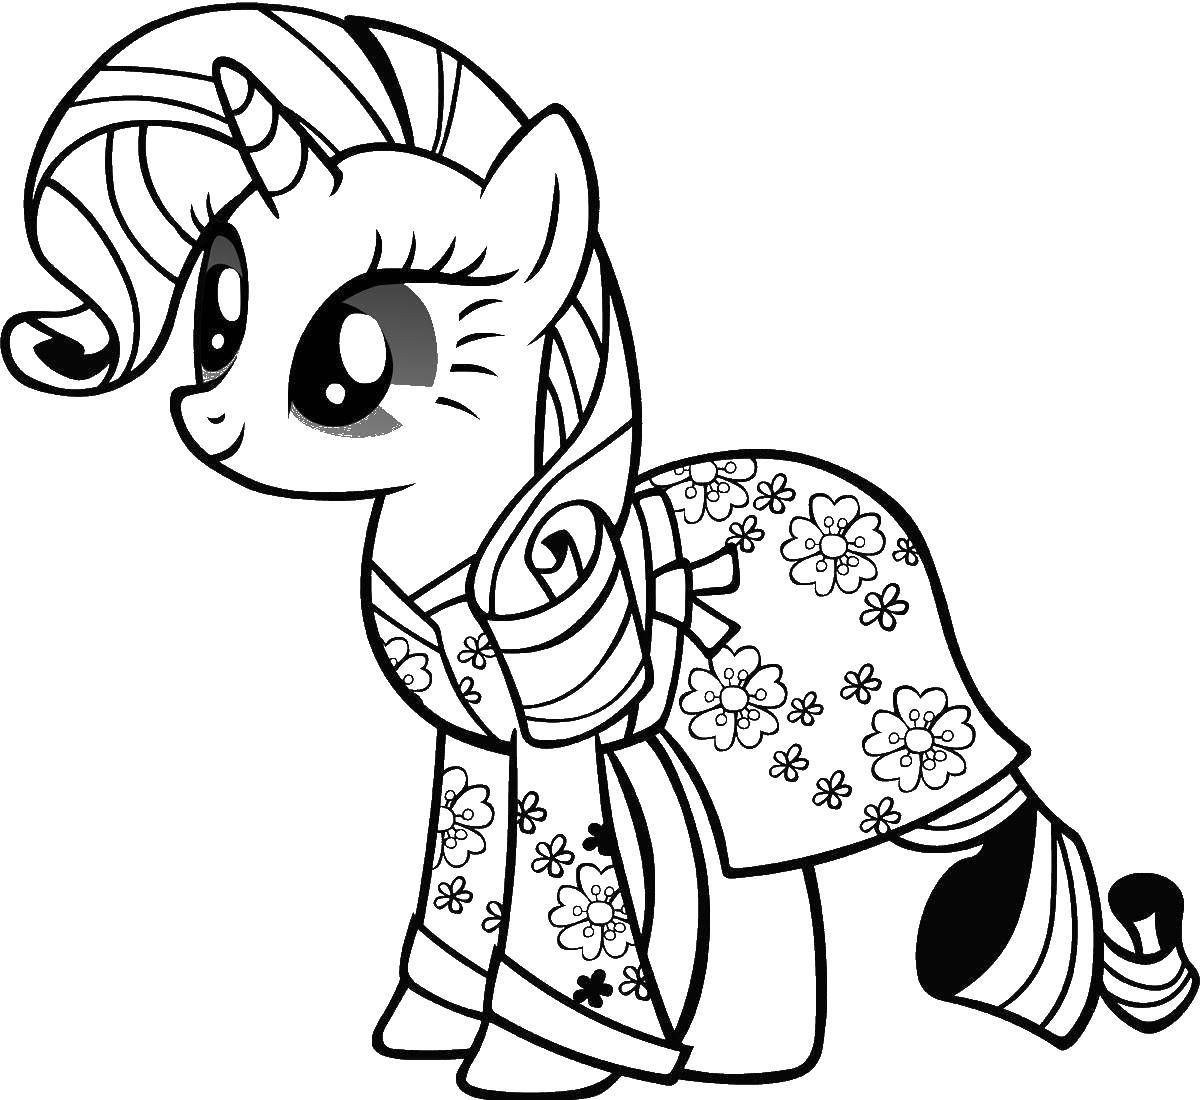 Coloring Rarity pony. Category my little pony. Tags:  that pony, Rarity.